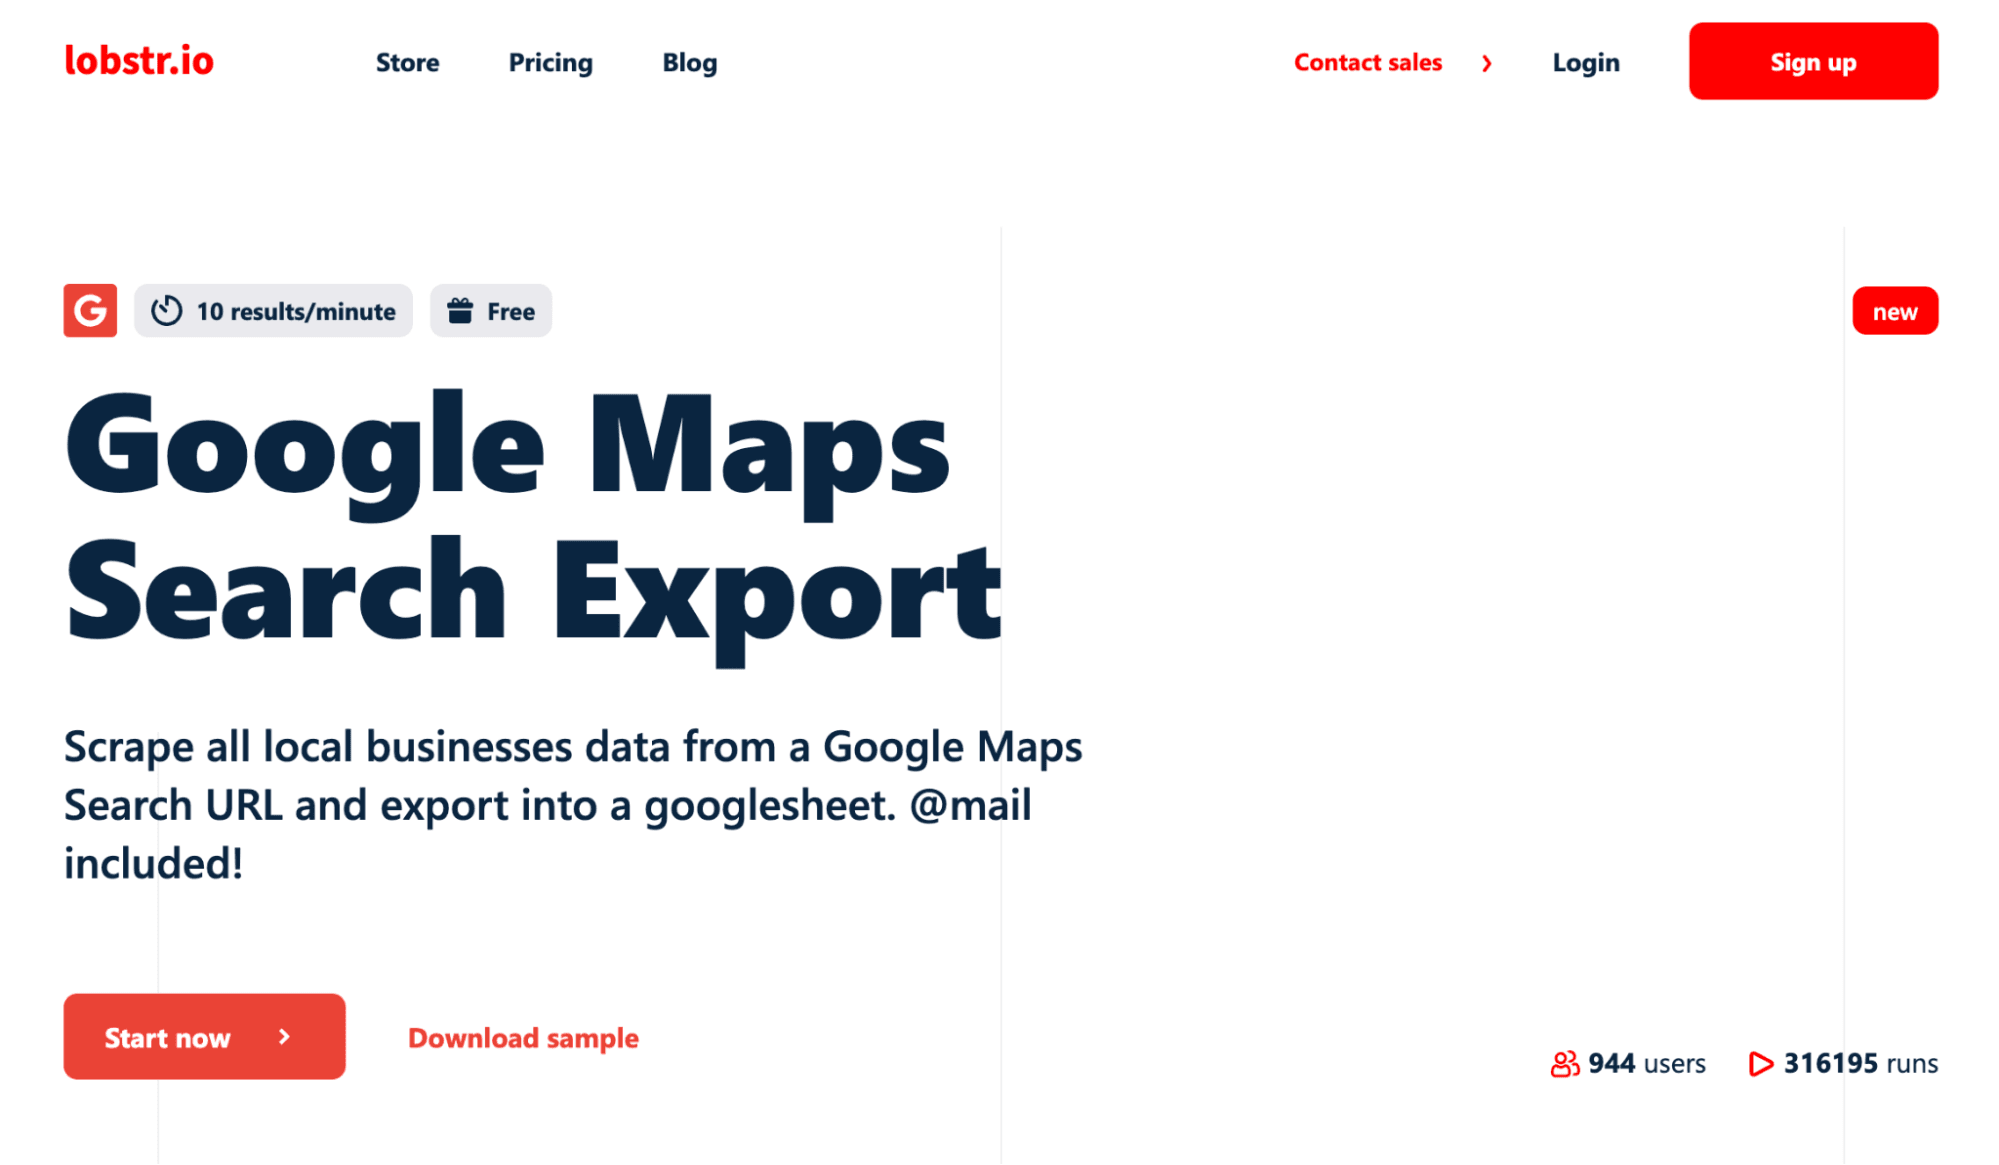 google maps search export lobstr - image19.png